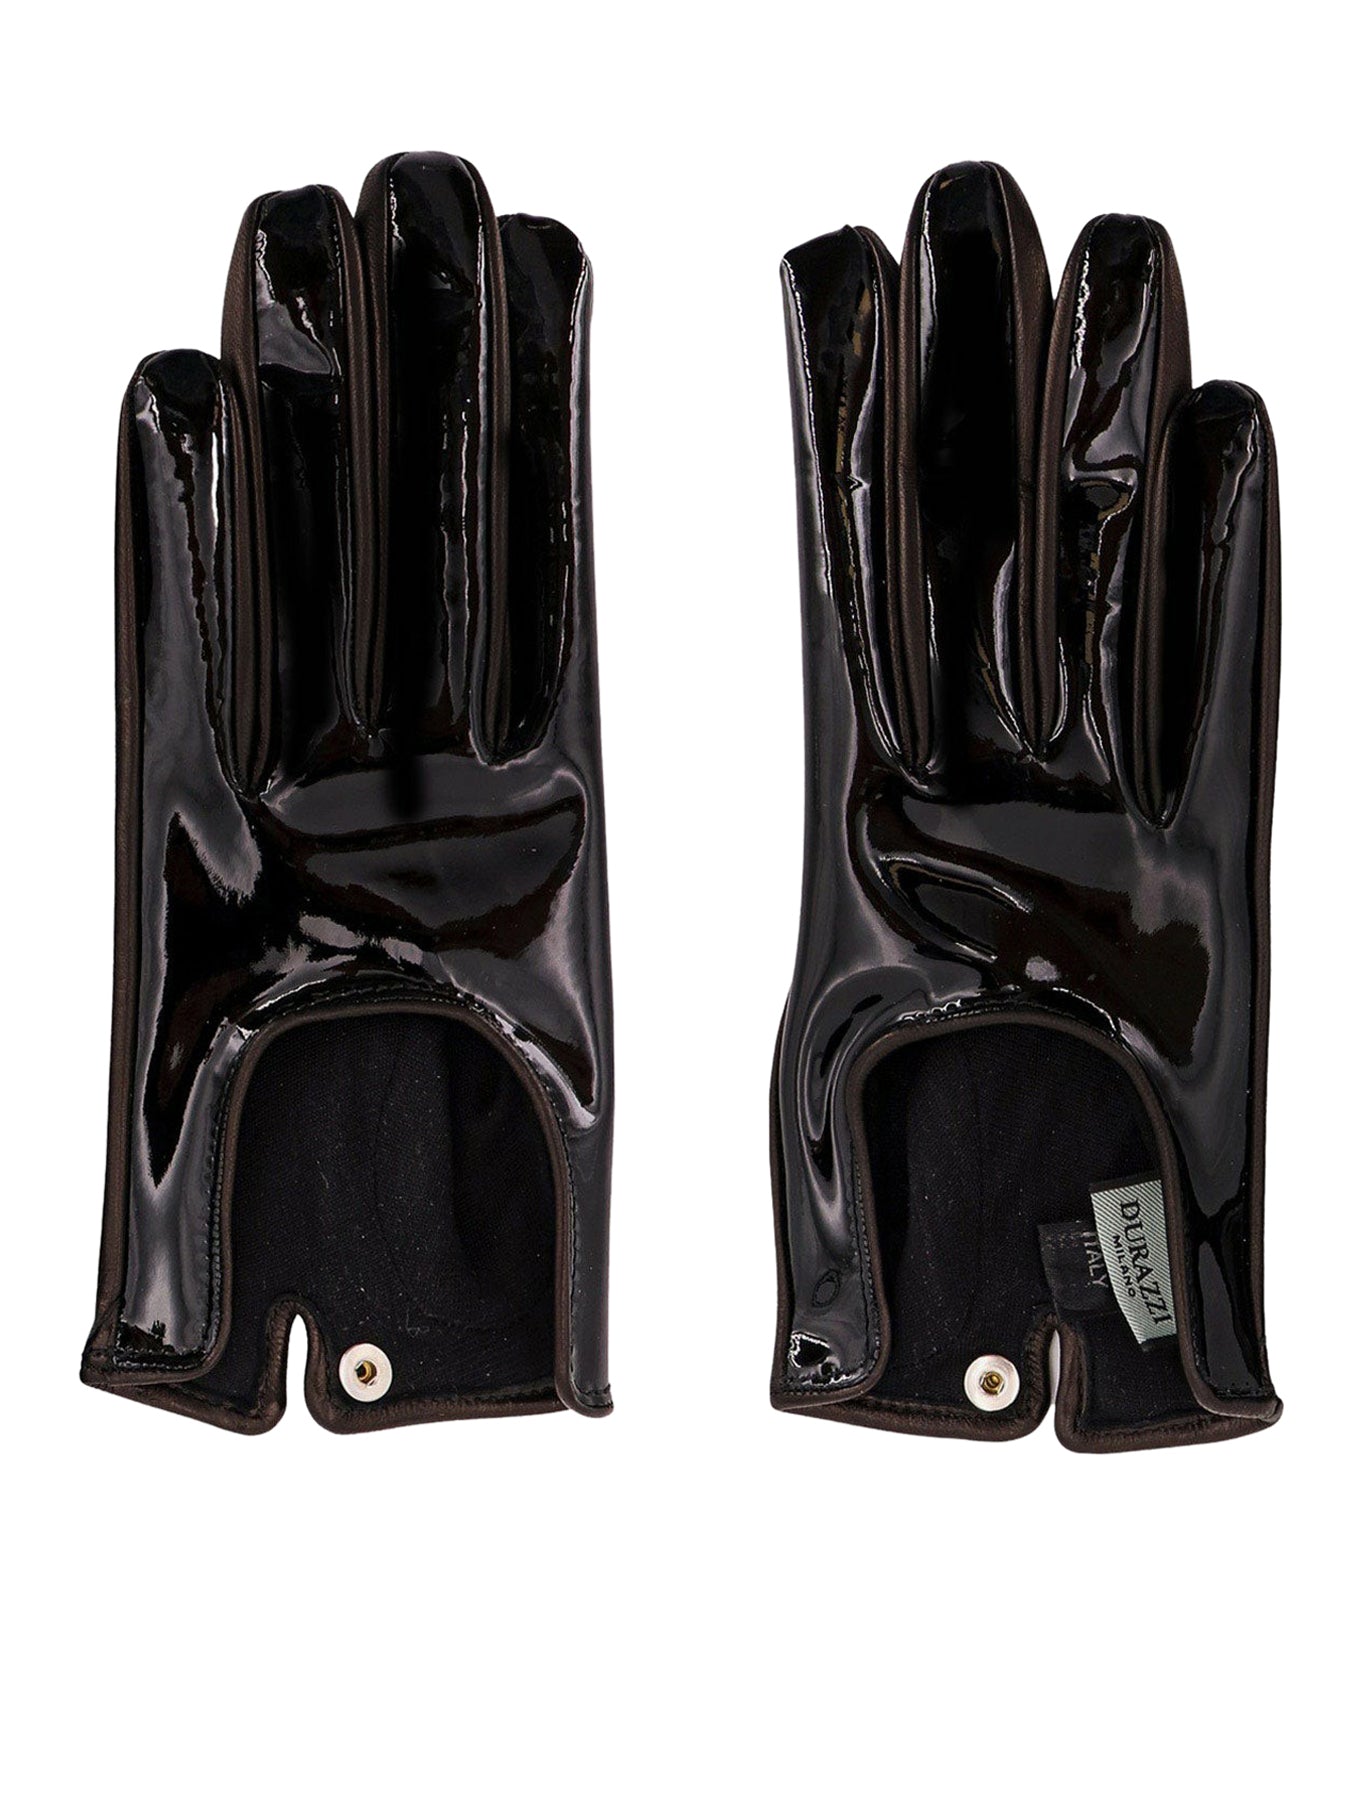 Patent leather gloves